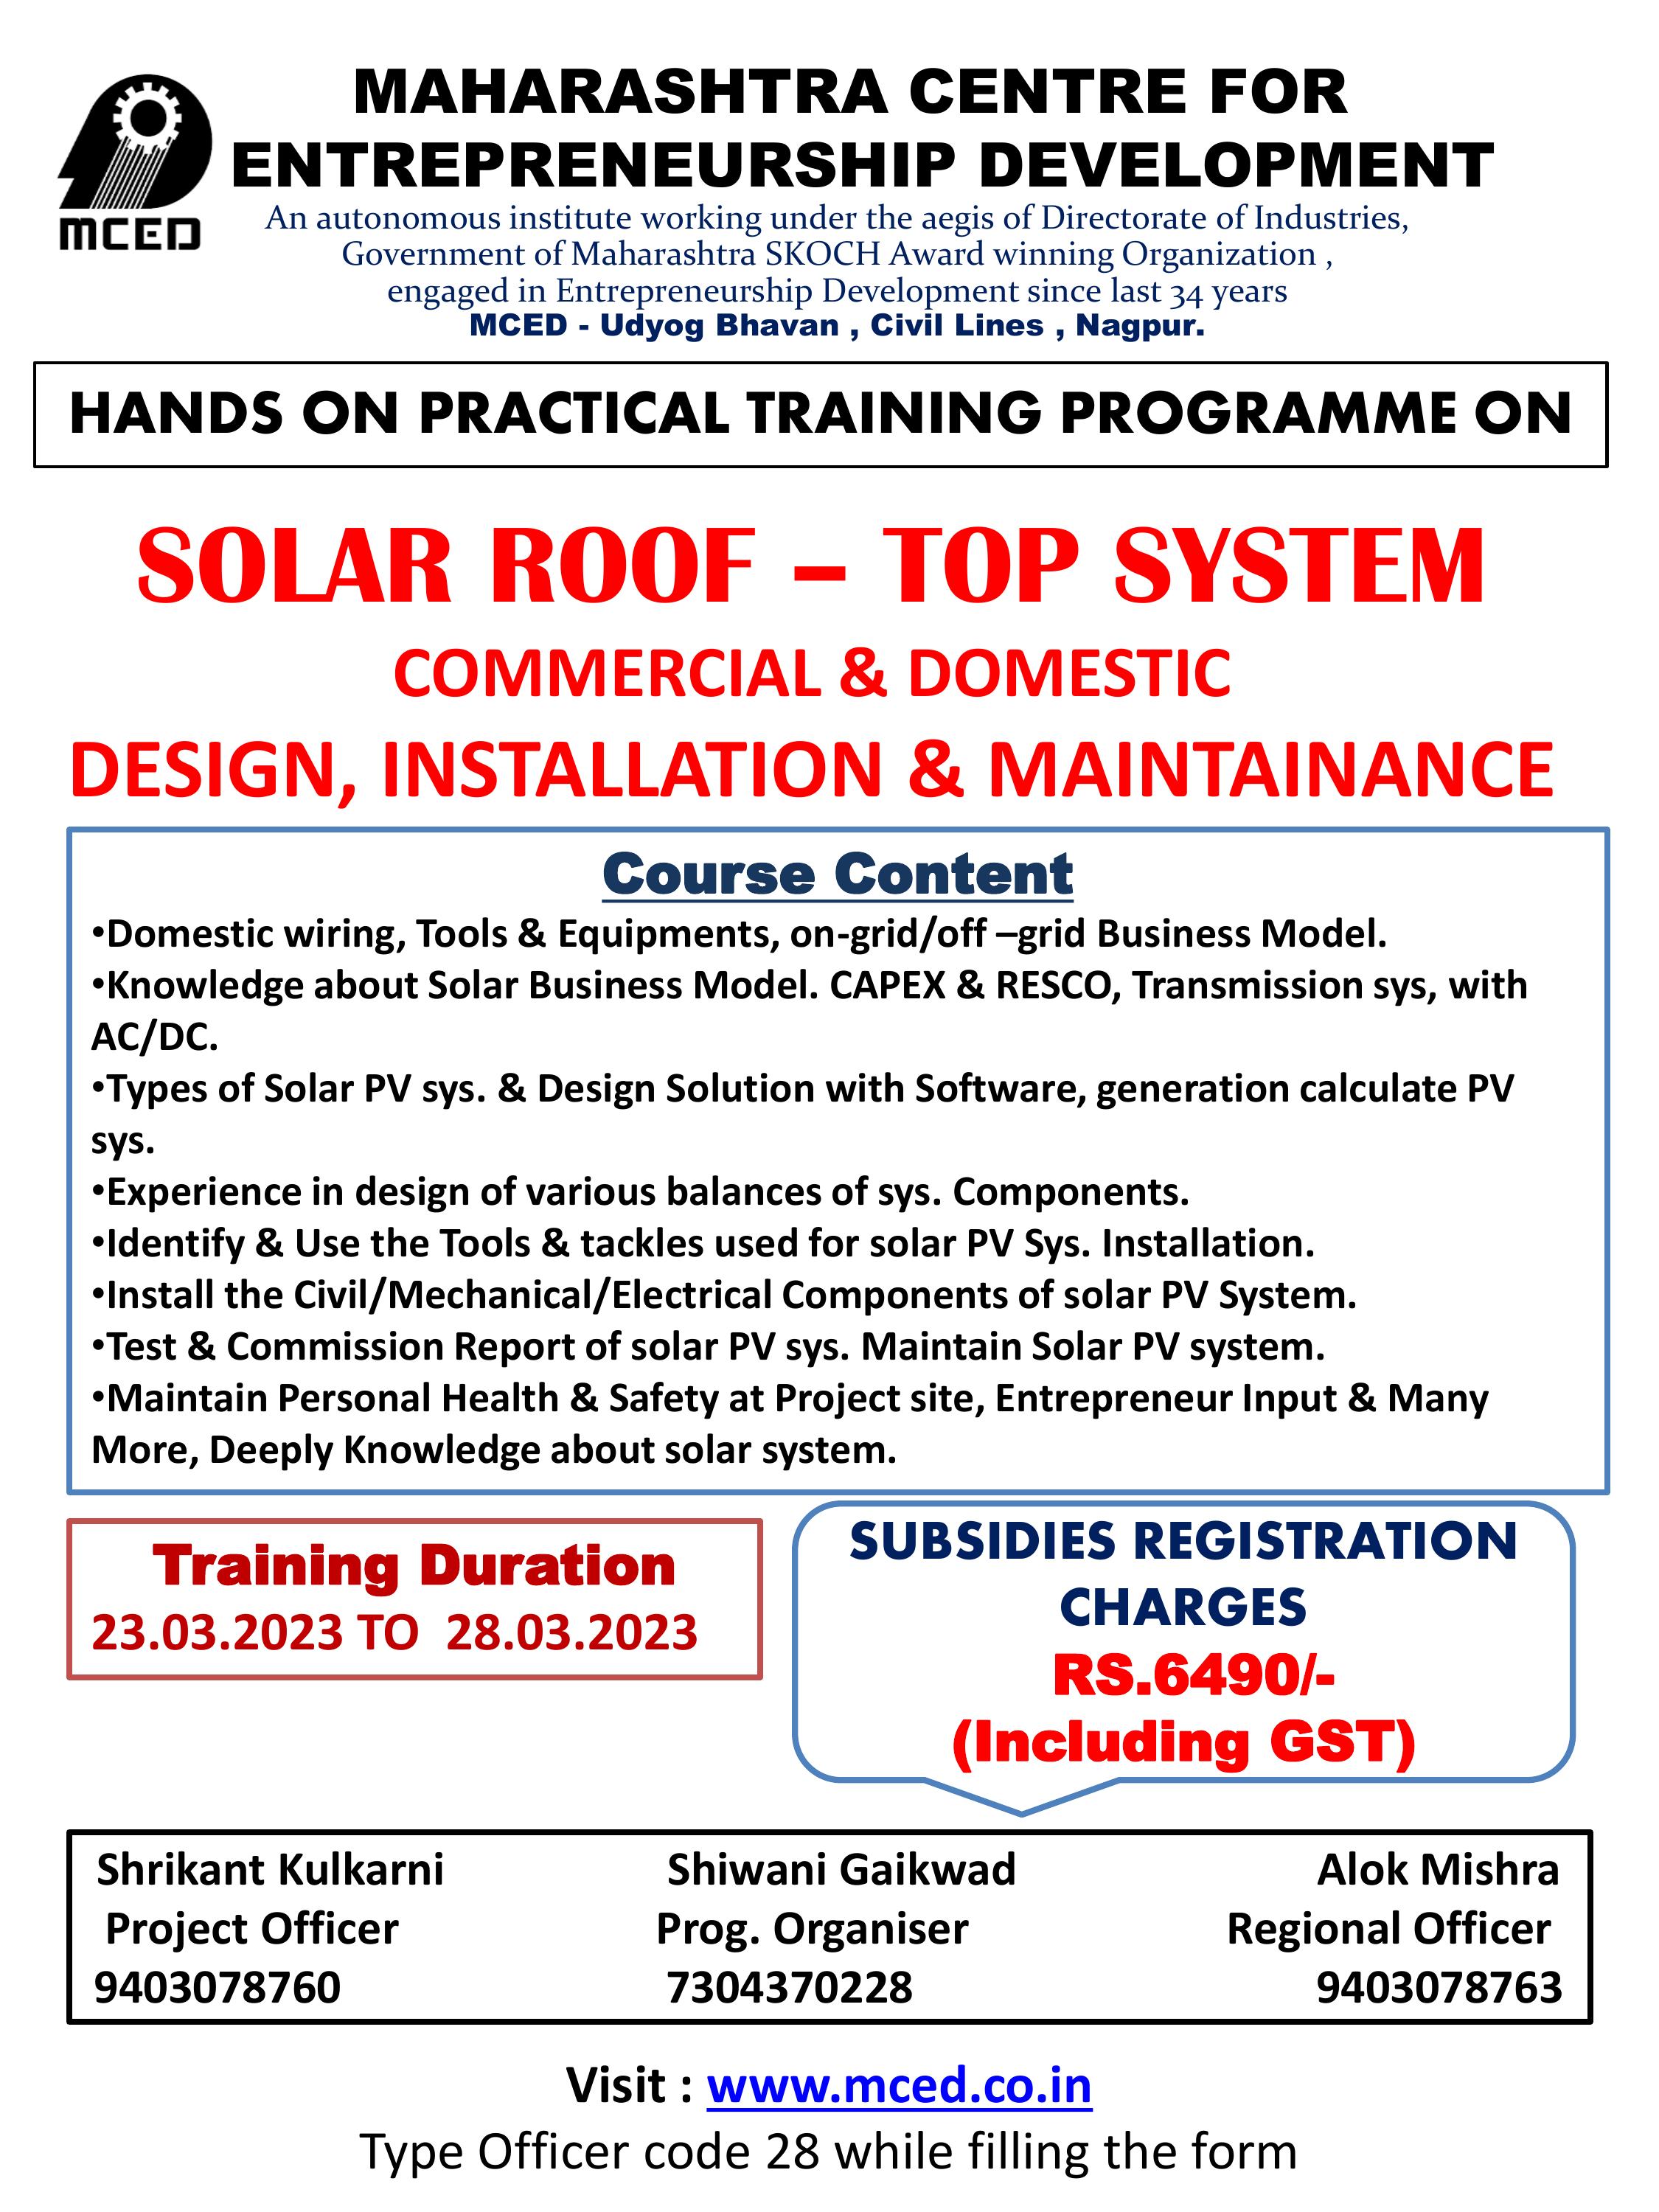 Solar Roof - Top System Programme at Nagpur